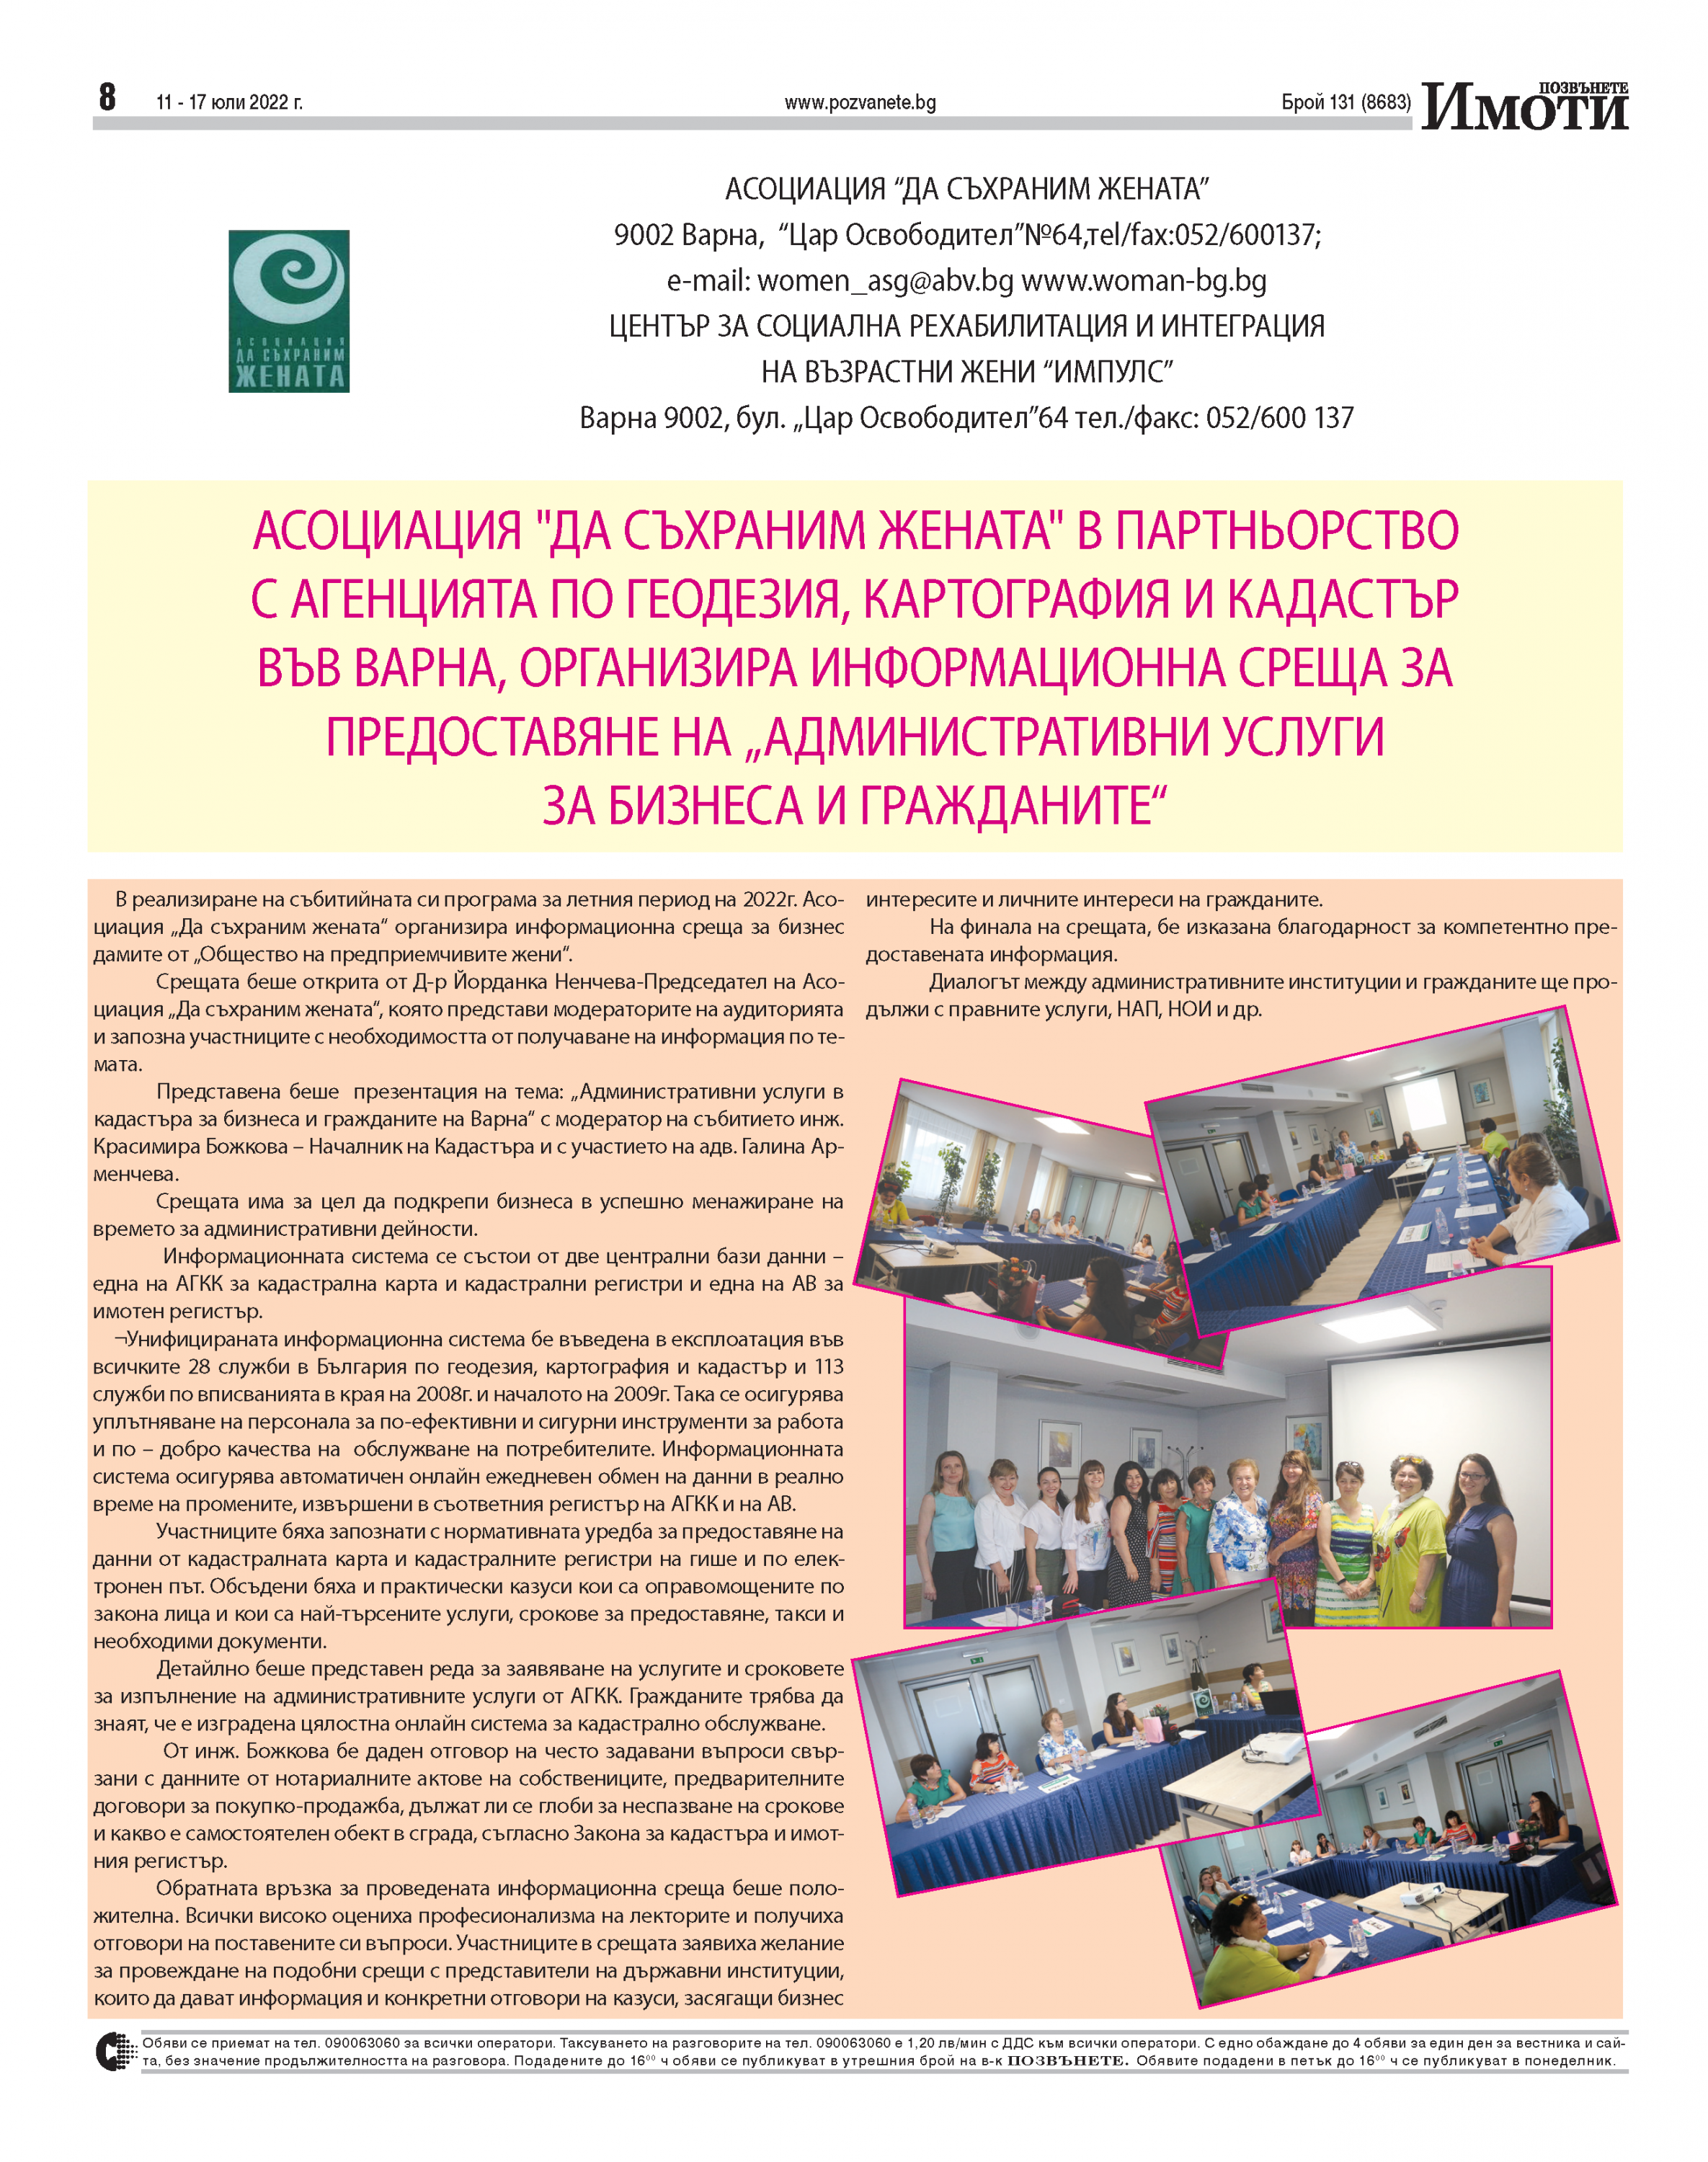 Pages-from-pozvanete-varna-2022-07-11.pdf